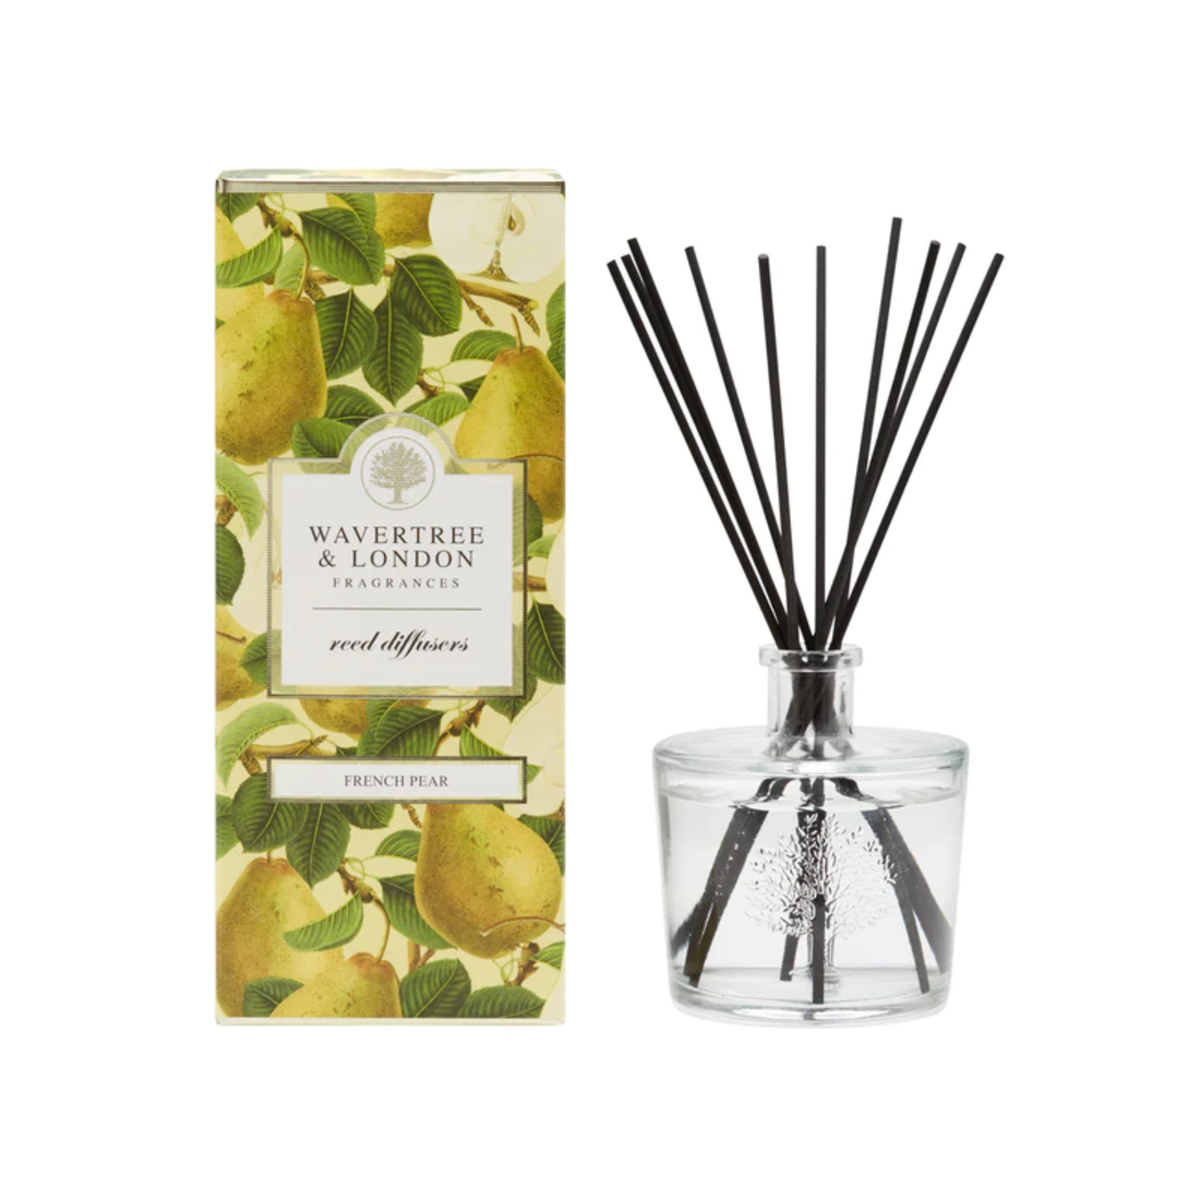 FRENCH PEAR DIFFUSER - WAVERTREE & LONDON